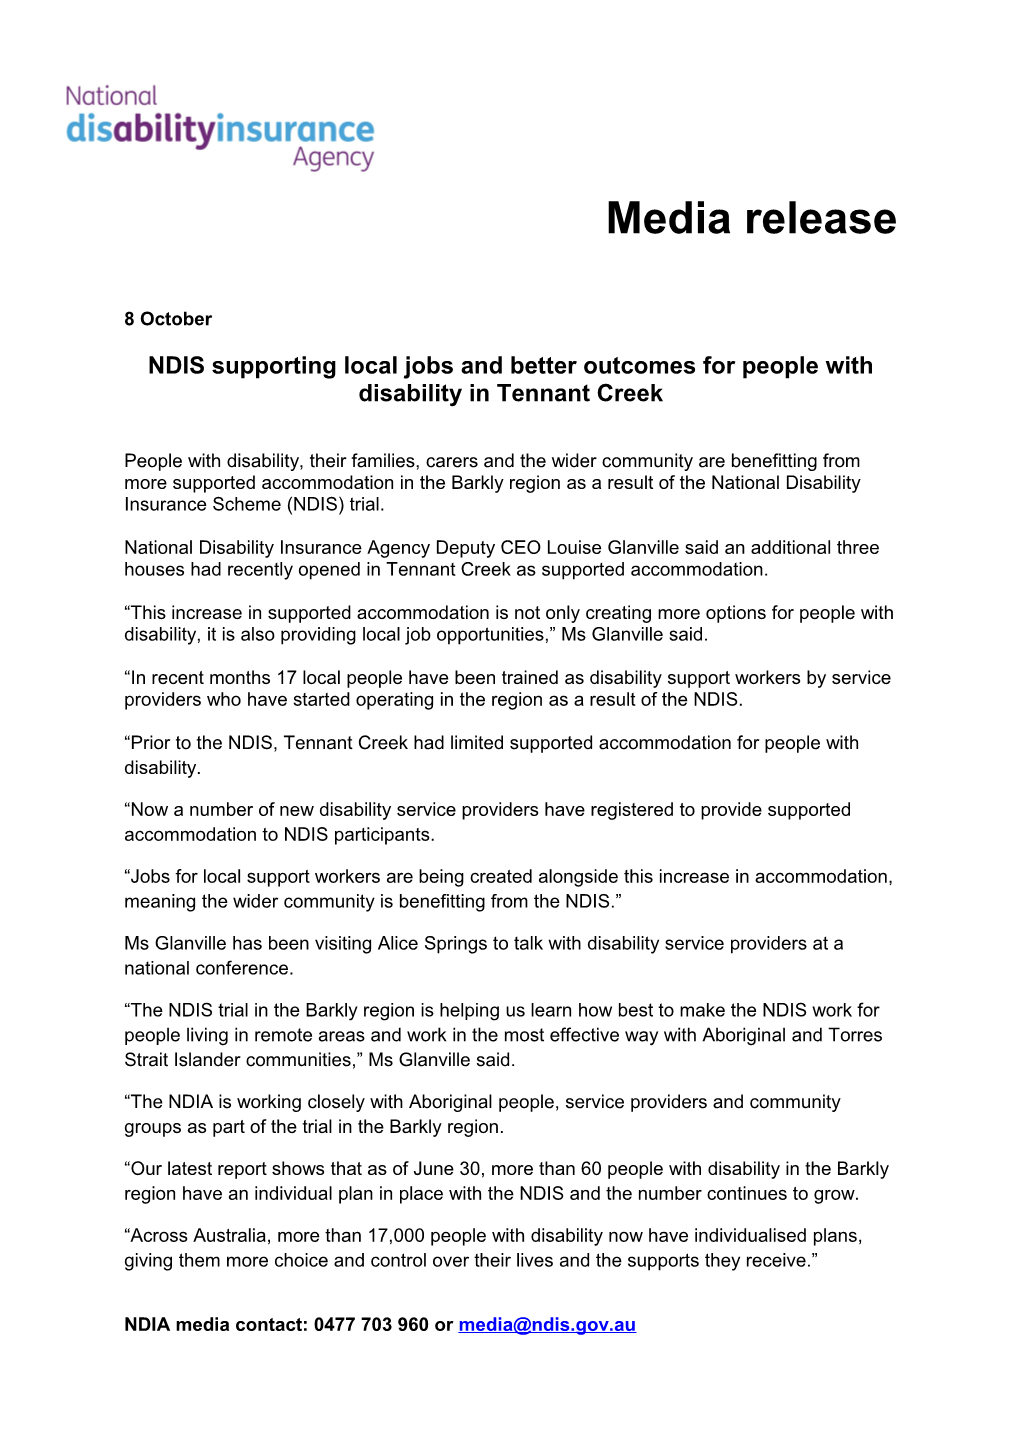 NDIS Supporting Local Jobs and Better Outcomes for People with Disability in Tennant Creek